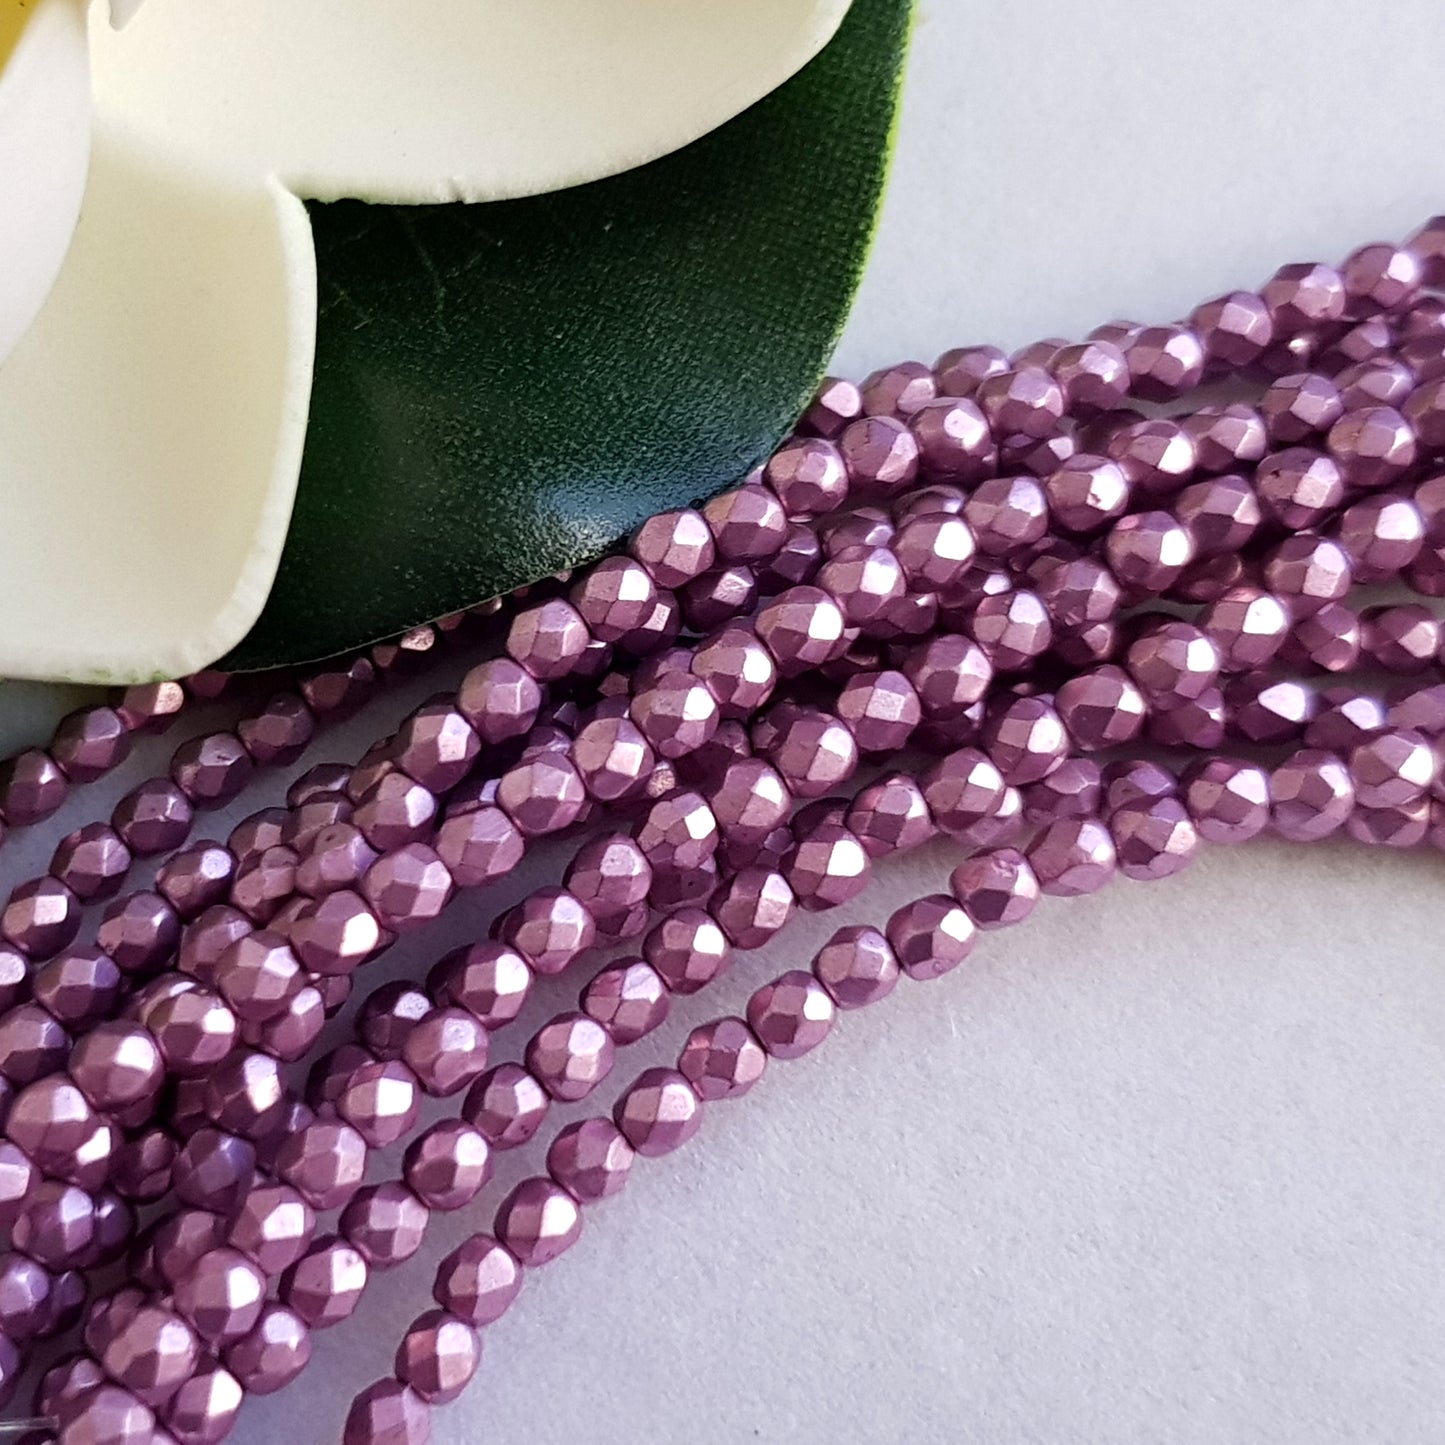 Czech Fire Polished 50 Bead Strand - Suede Gold Orchid 3mm Round Faceted  |  FP-08A03-CB-03 | Beading Supply